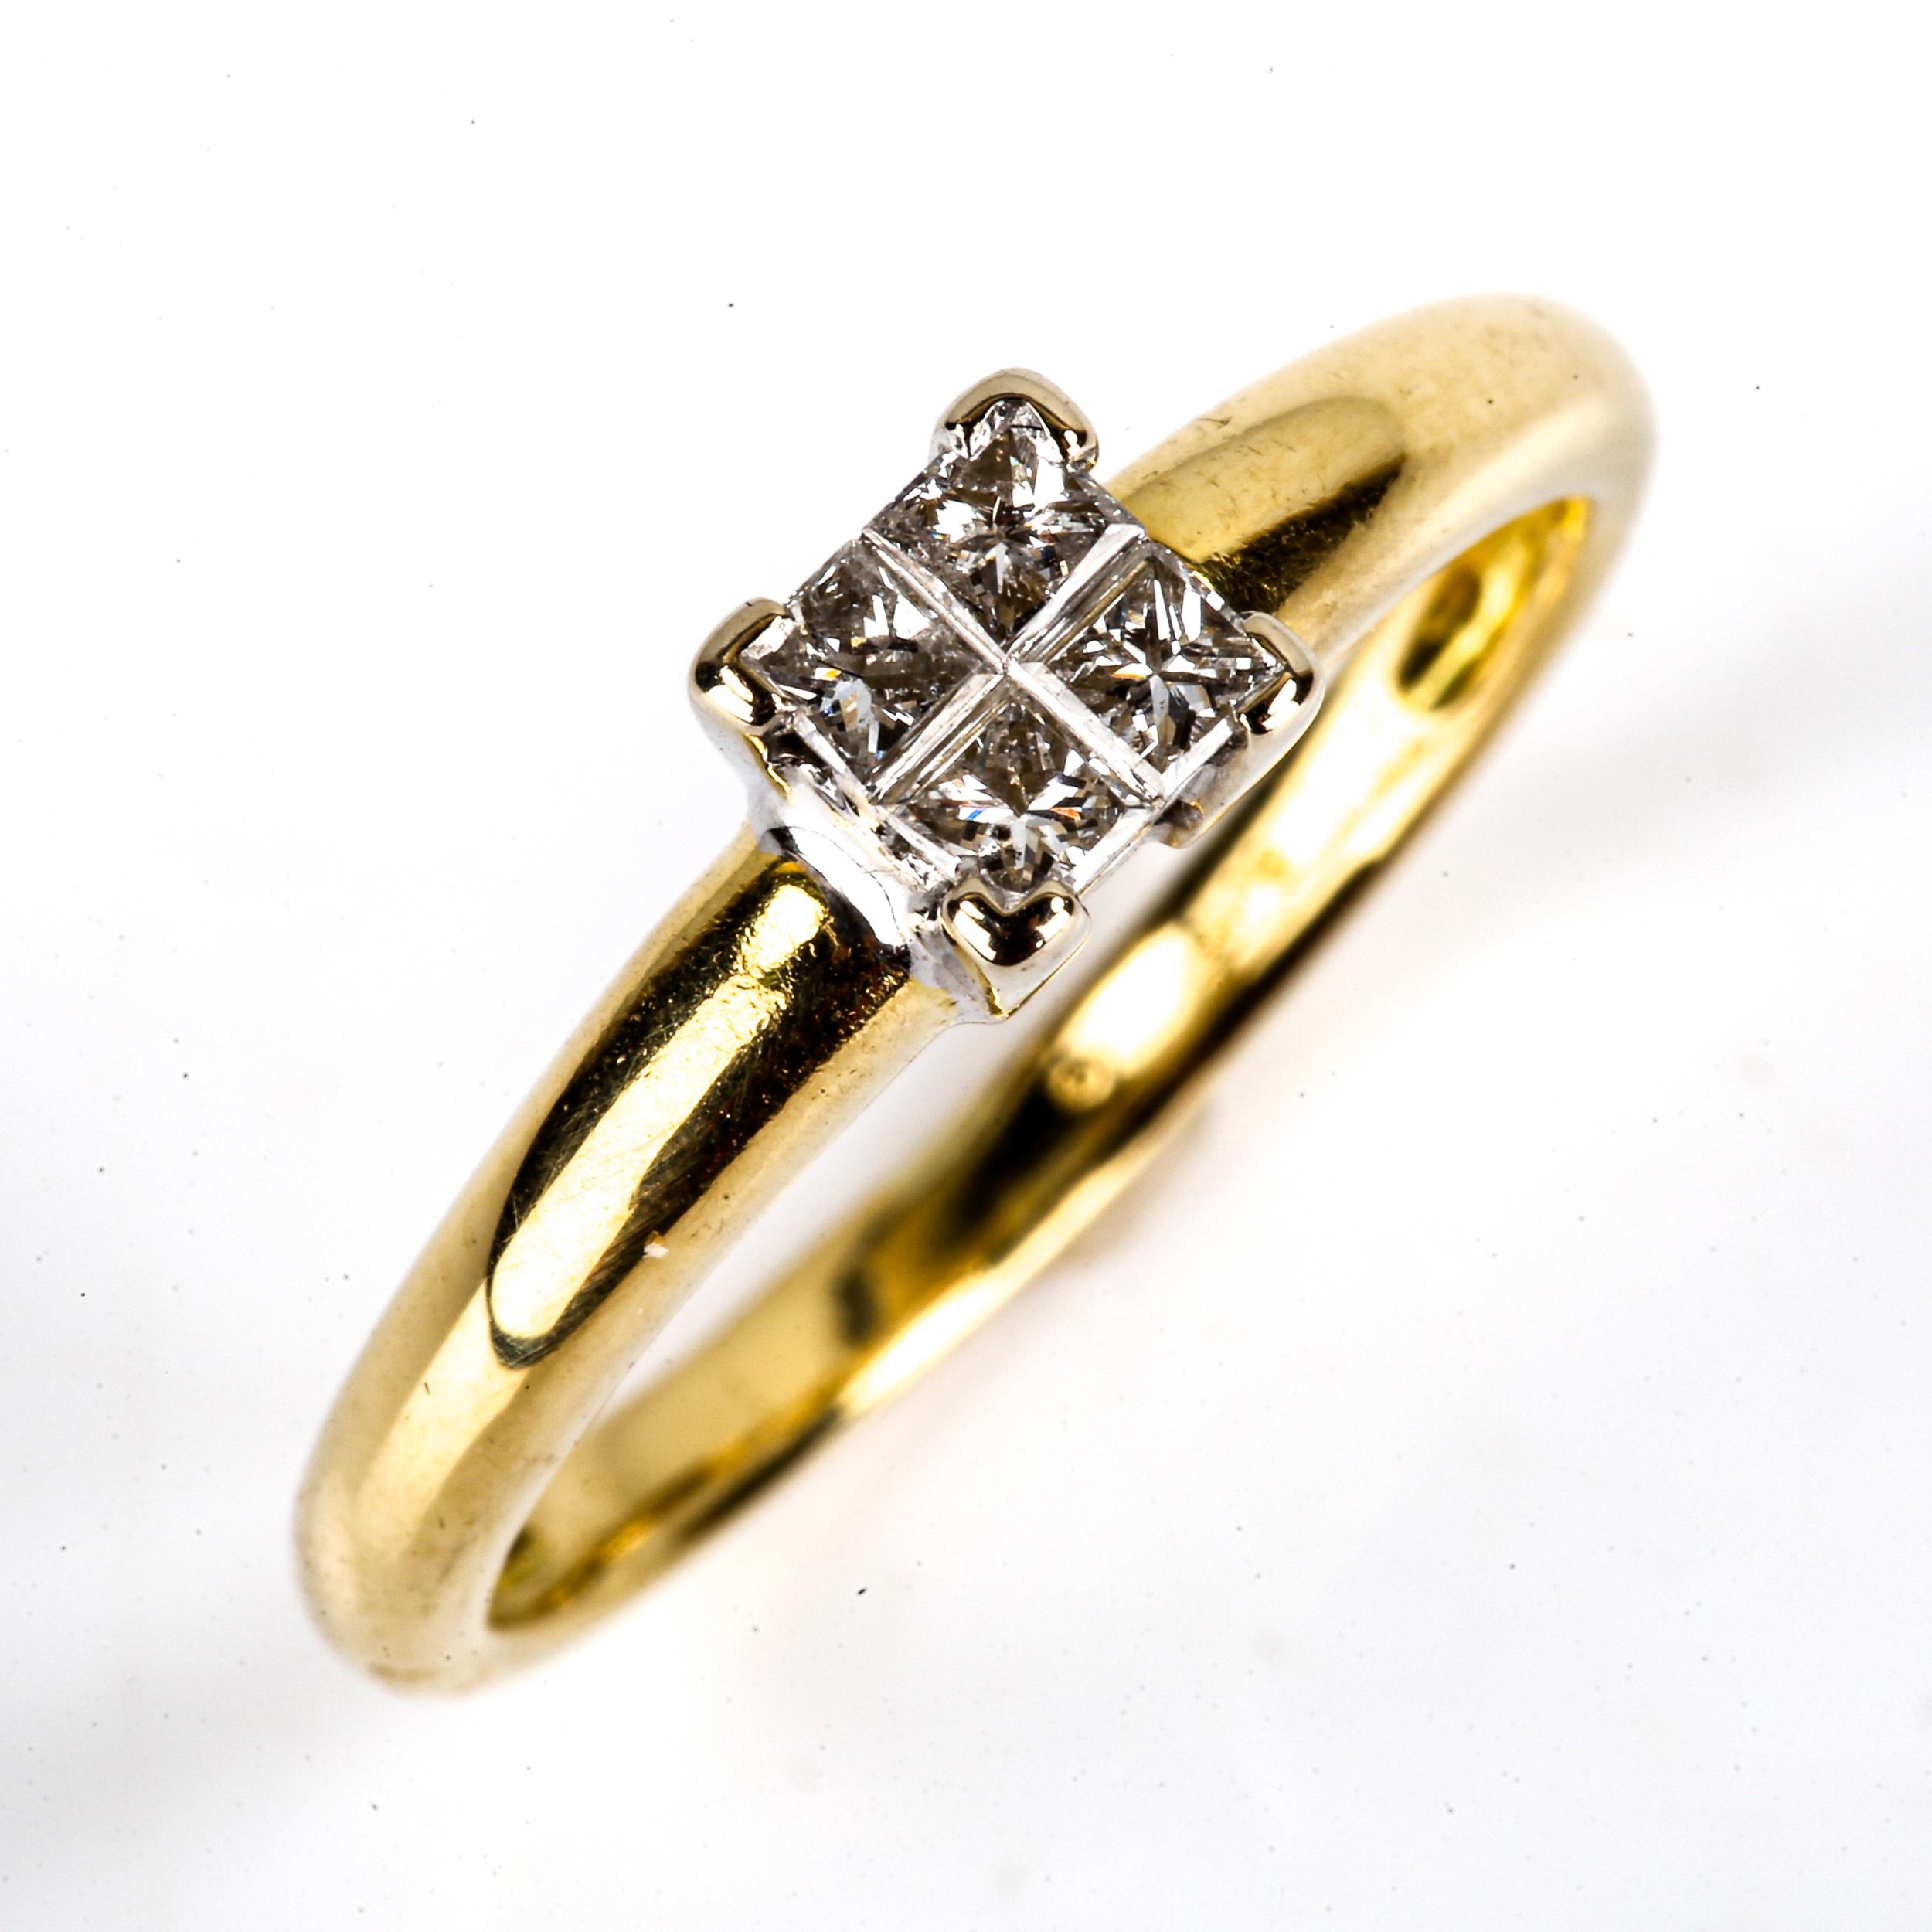 A modern 18ct gold Princess diamond cluster ring, total diamond content approx 0.2ct, setting height